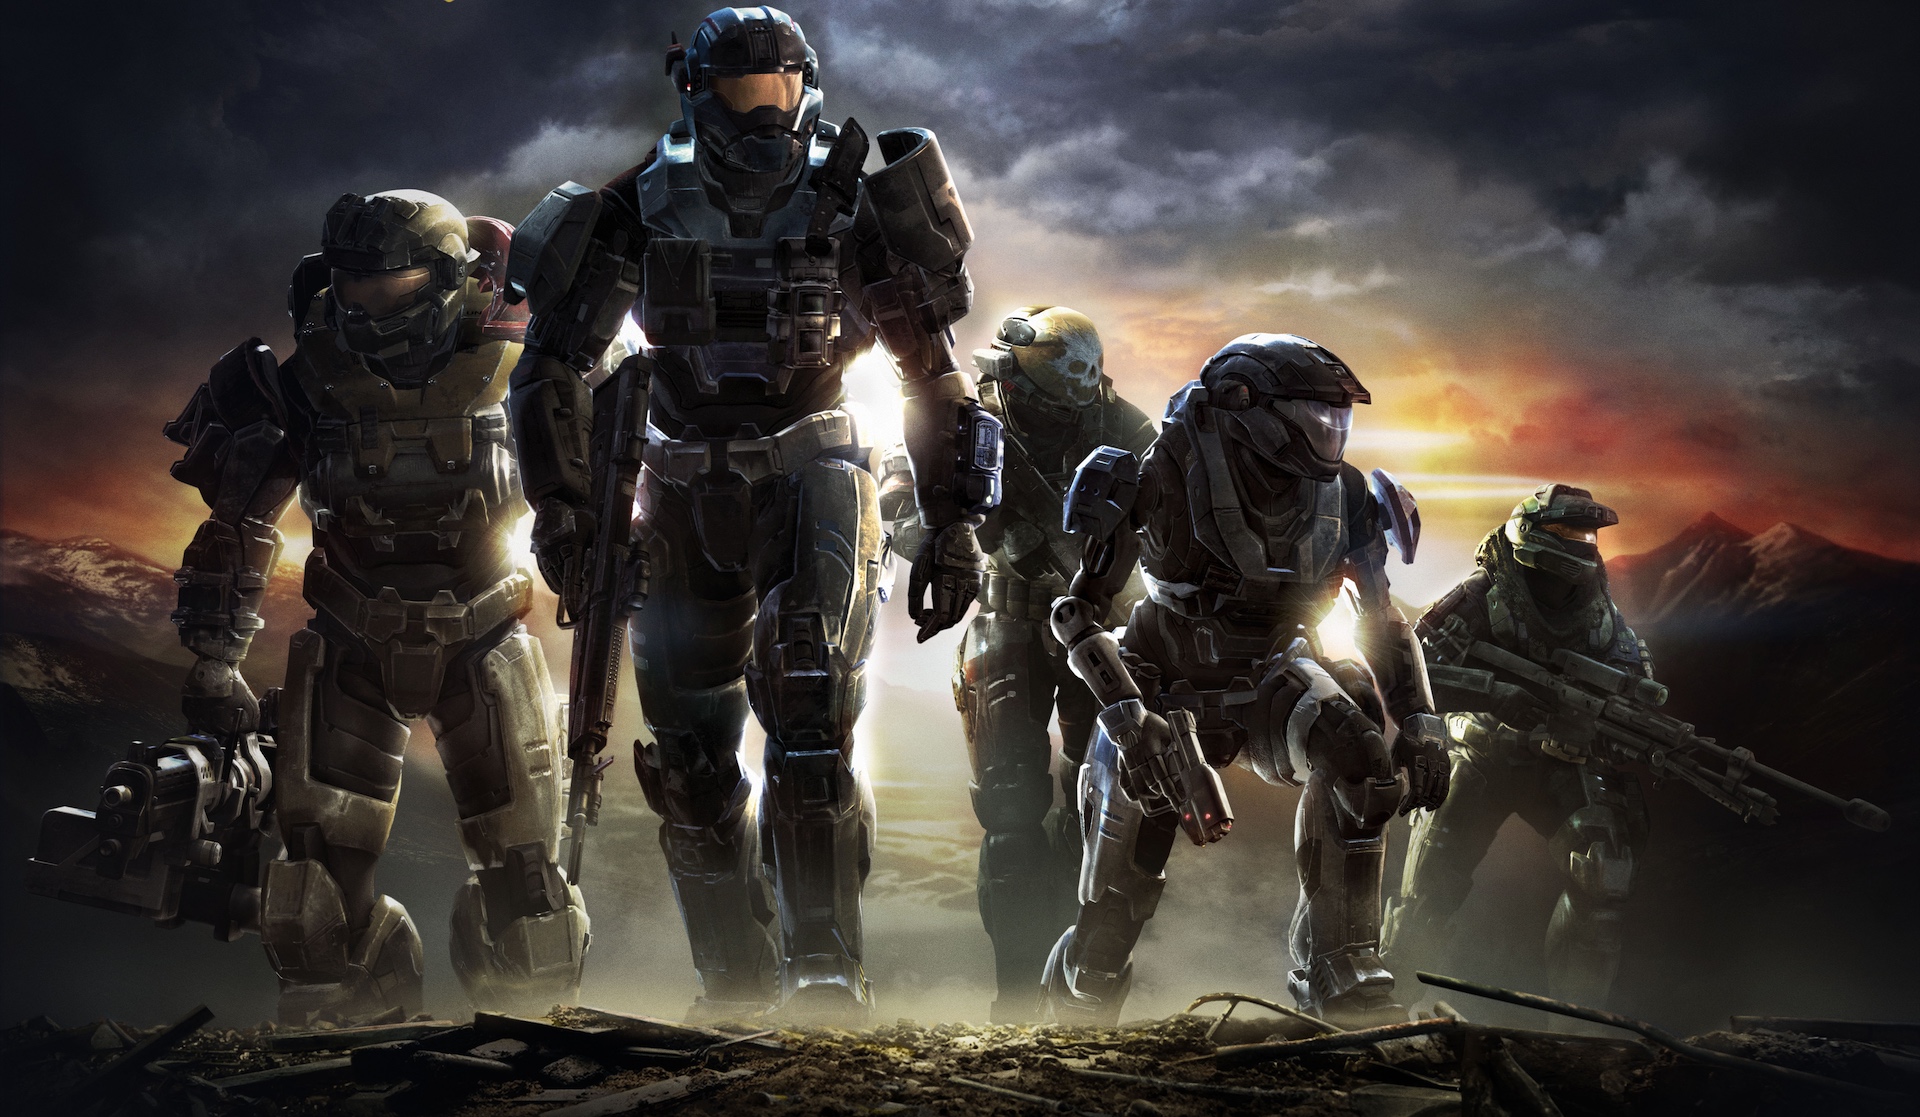 Artwork of Halo: Reach featuring four Spartans